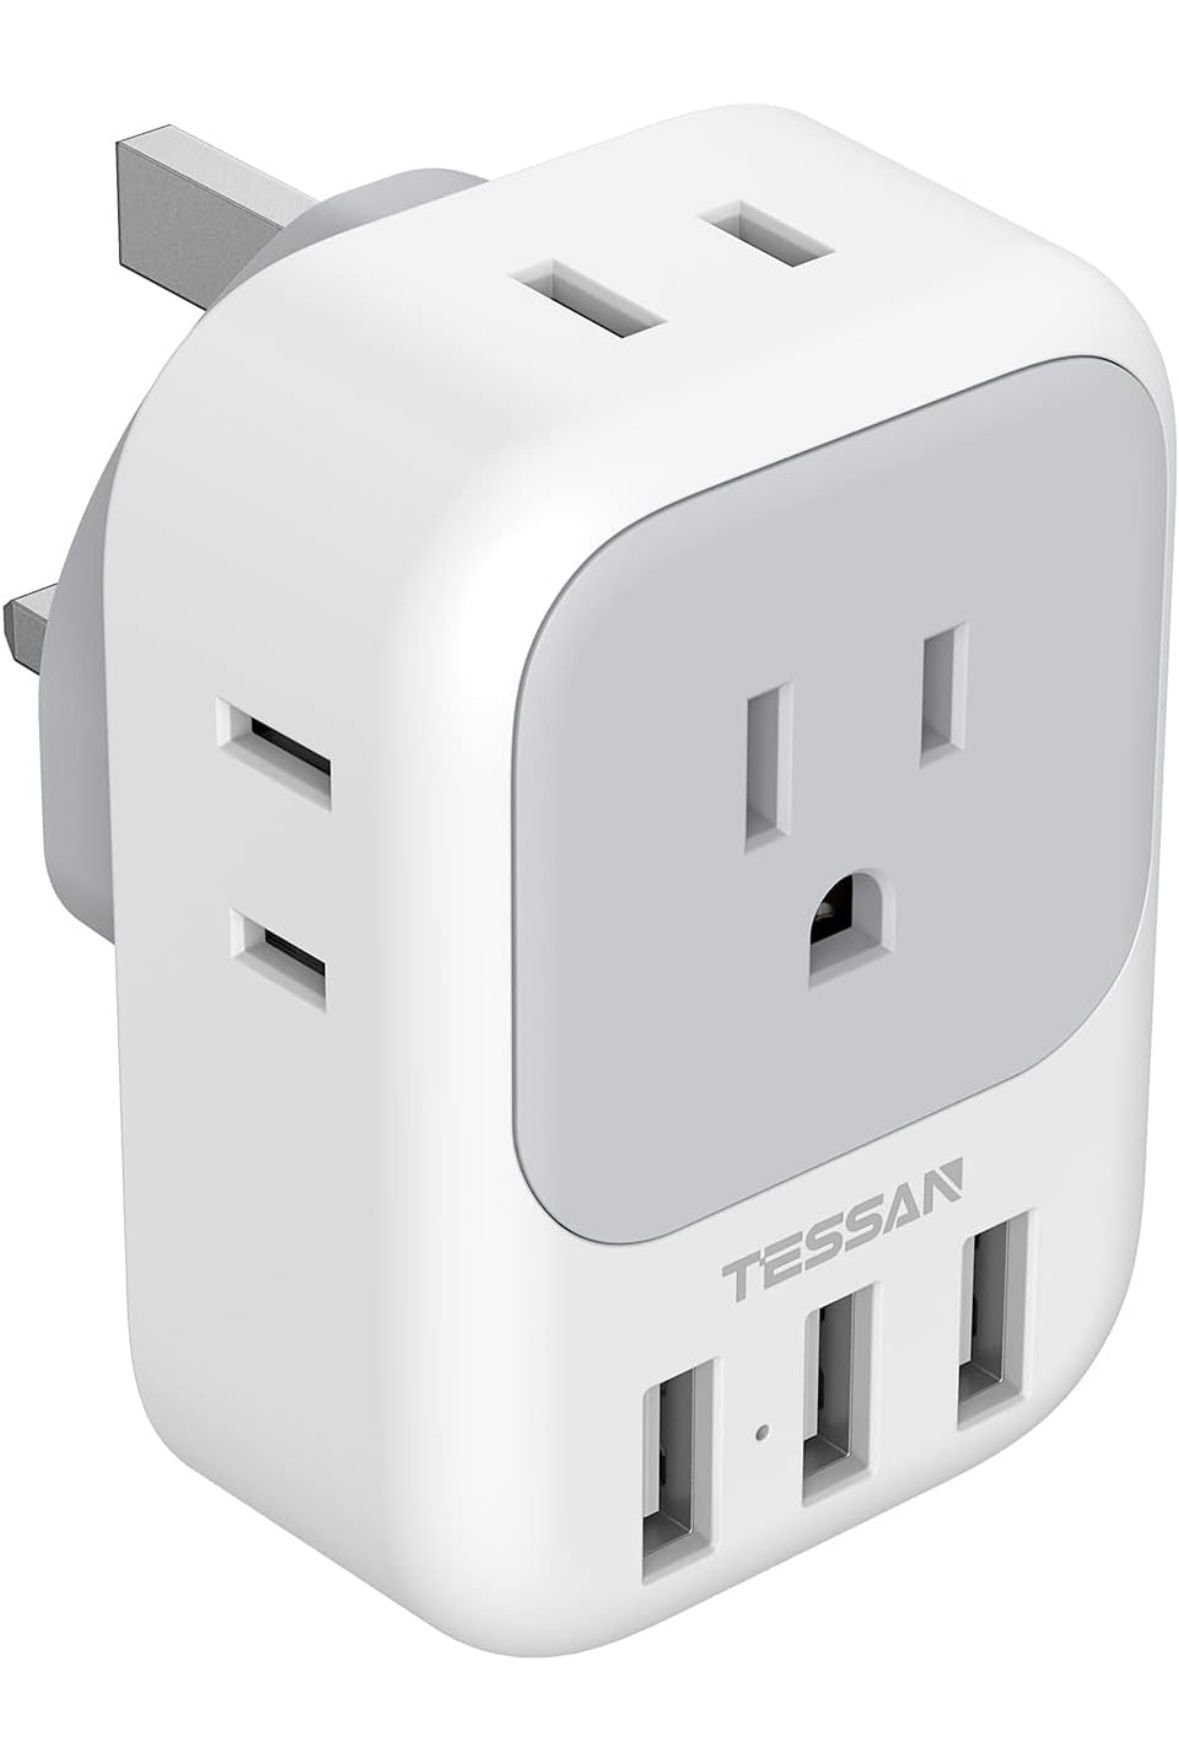 US to UK Plug Adapter, TESSAN Type G Travel Converter with 3 USB Gray